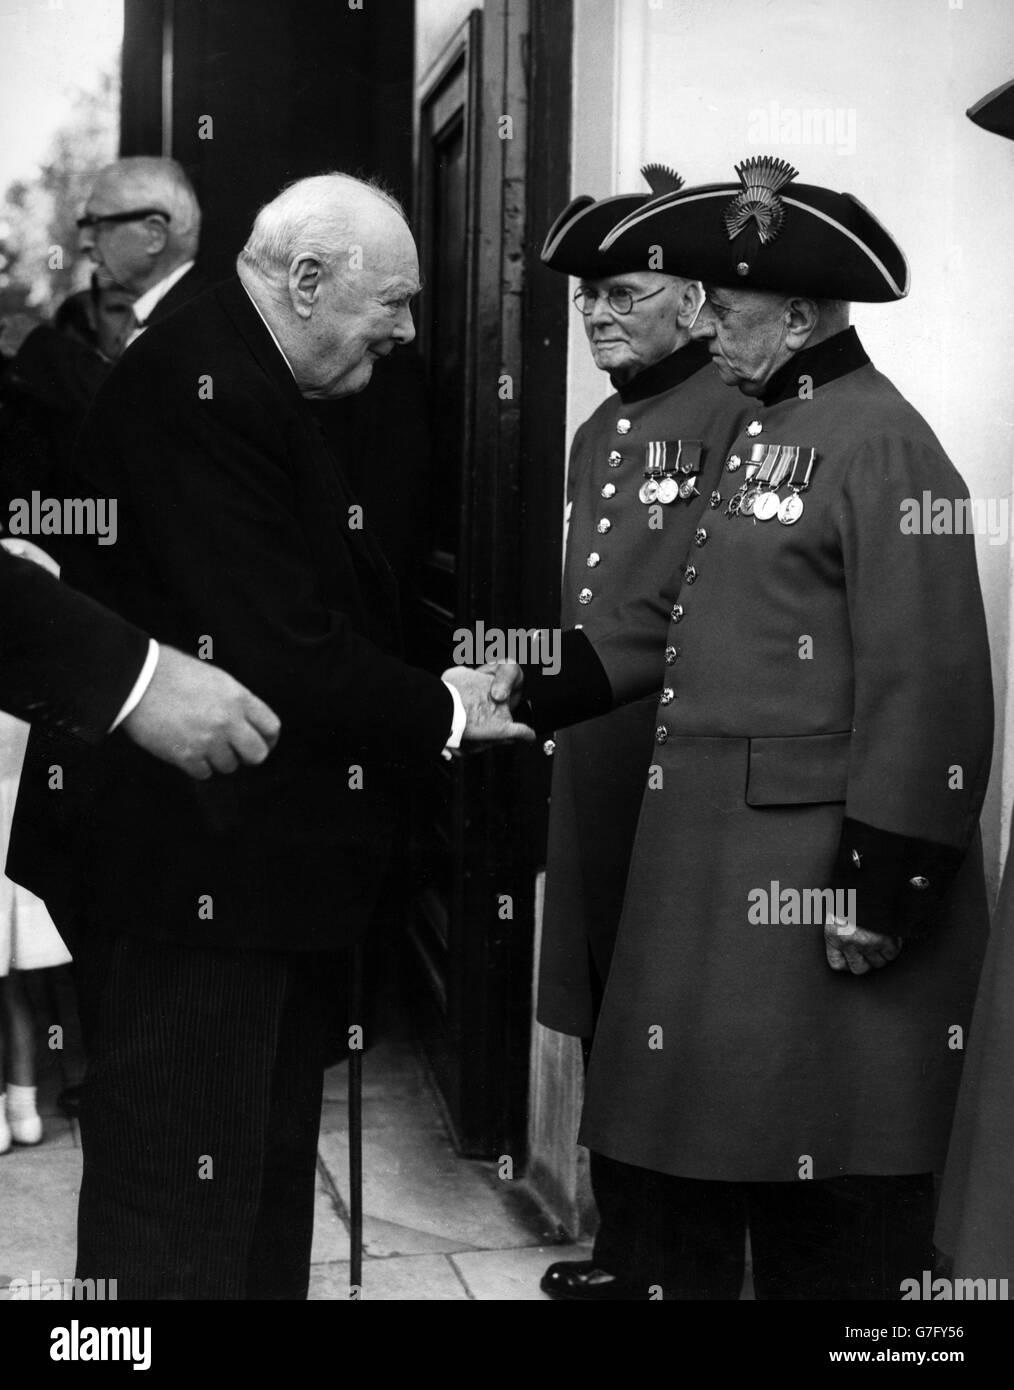 Sir Winston Churchill shakes hands with Chelsea pensioner Trooper Cooper, 74, outside the Royal Hospital Chapel in Chelsea. Churchill was attending the christening of his newest grandchild Rupert Christopher Soames. Stock Photo